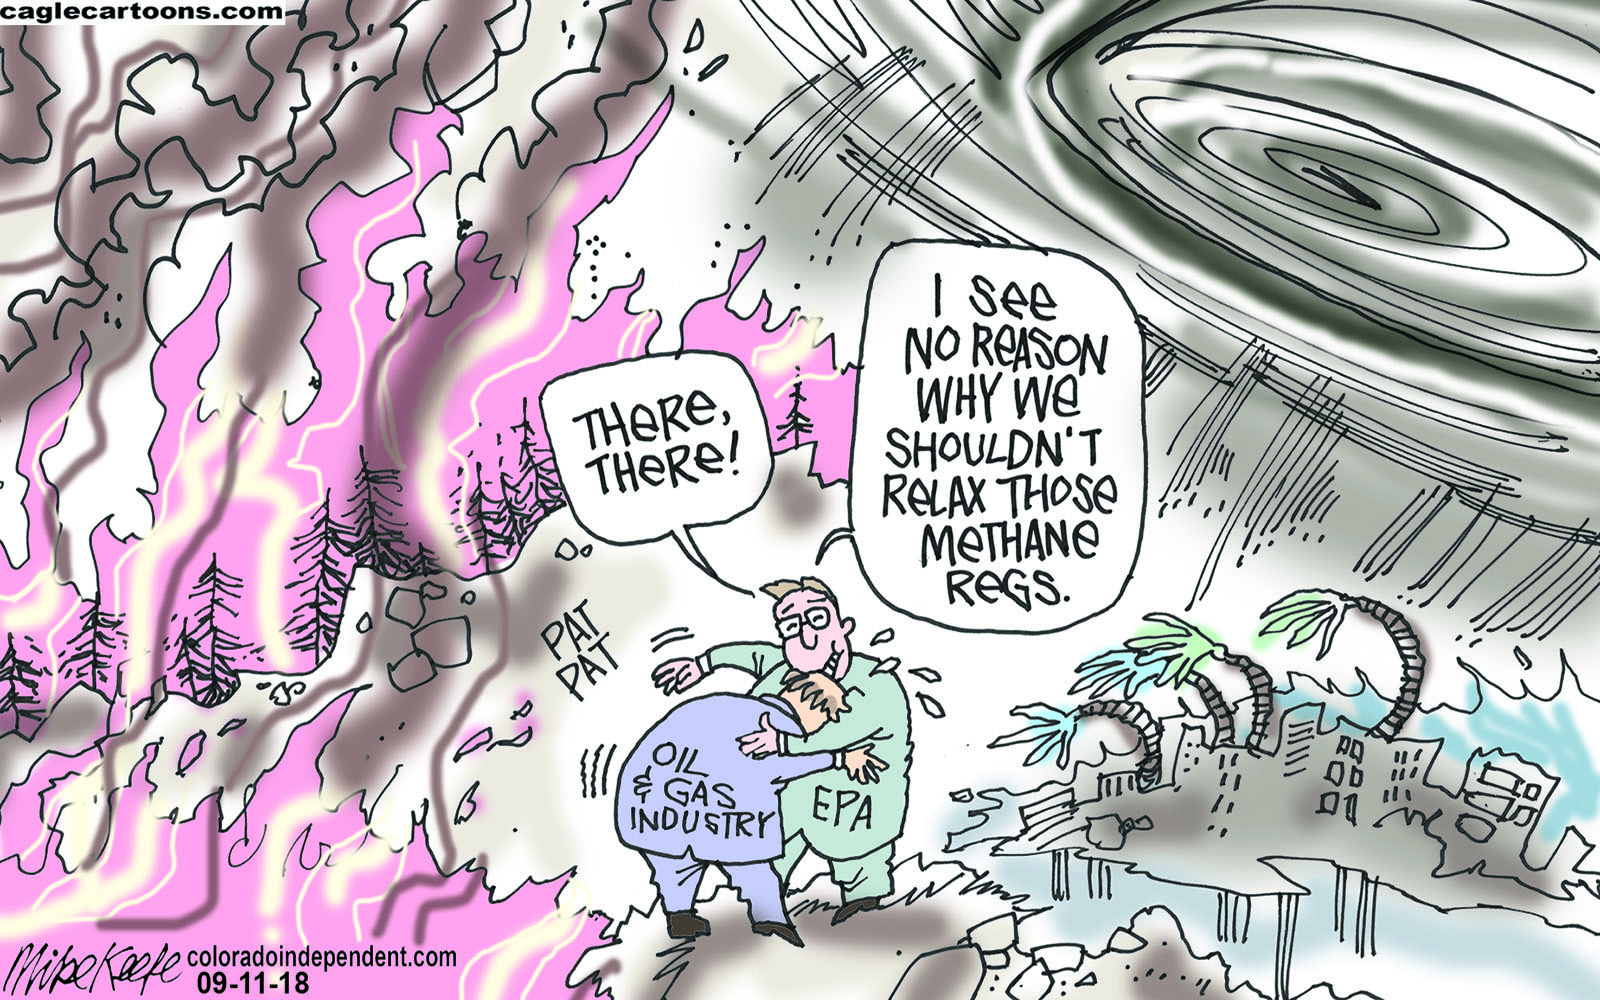 Political cartoon . EPA methane emission regulations climate change natural  disasters